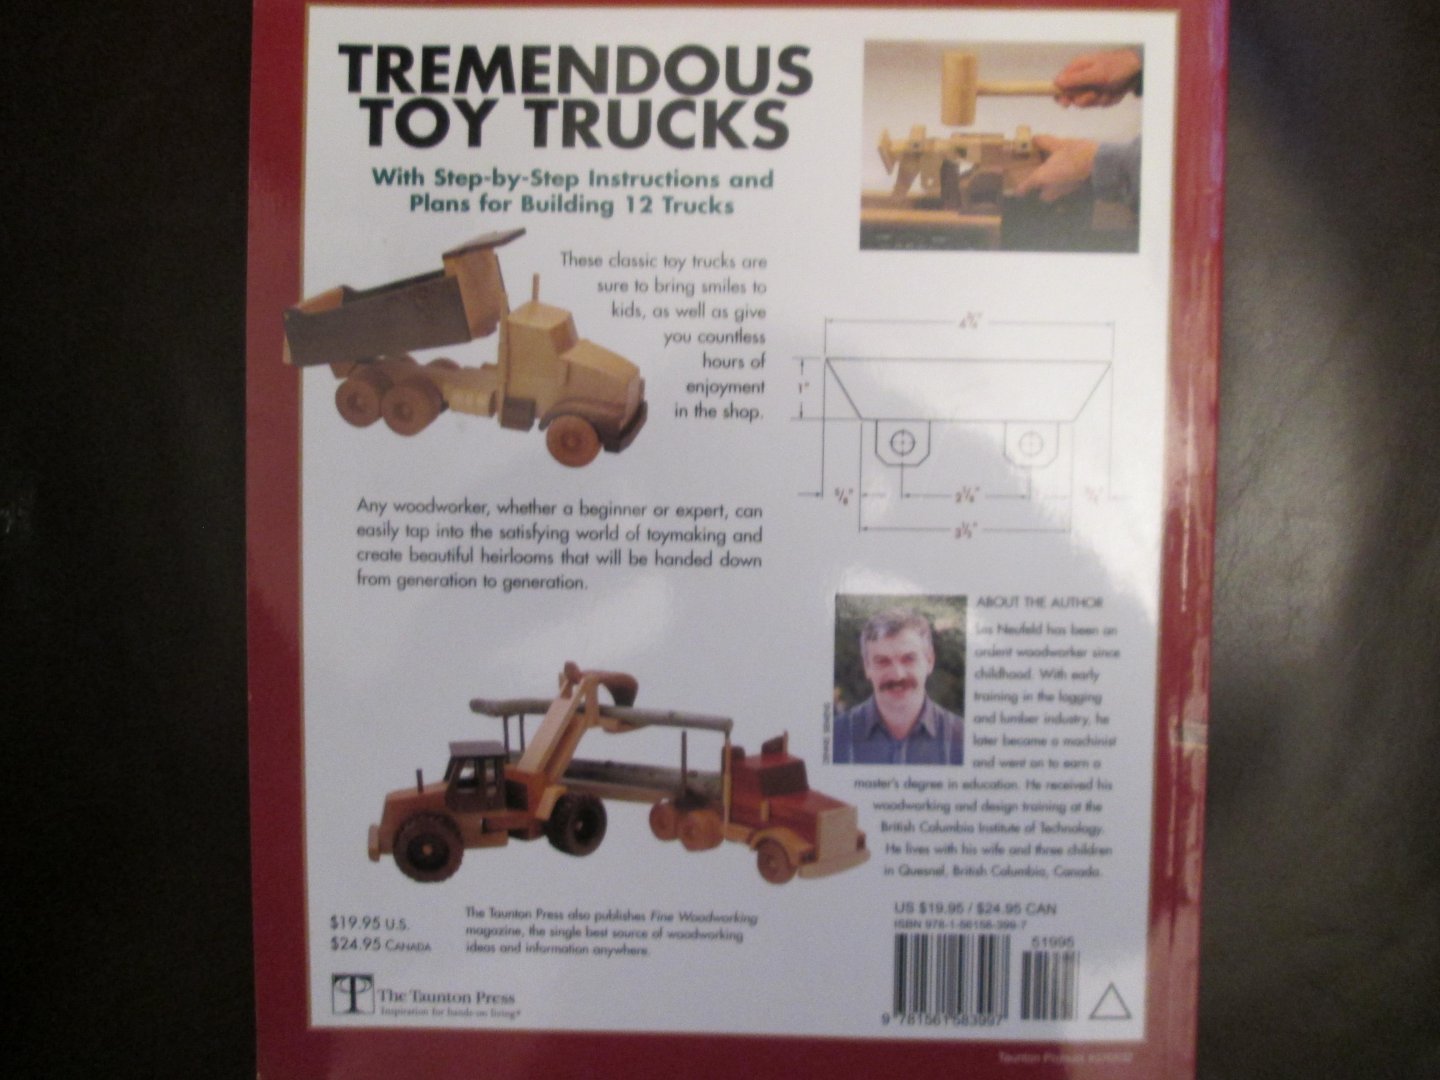 Neufeld , Les - TREMENDOUS TOY TRUCKS ; with step - by - step instructions and plans for building 12 trucks